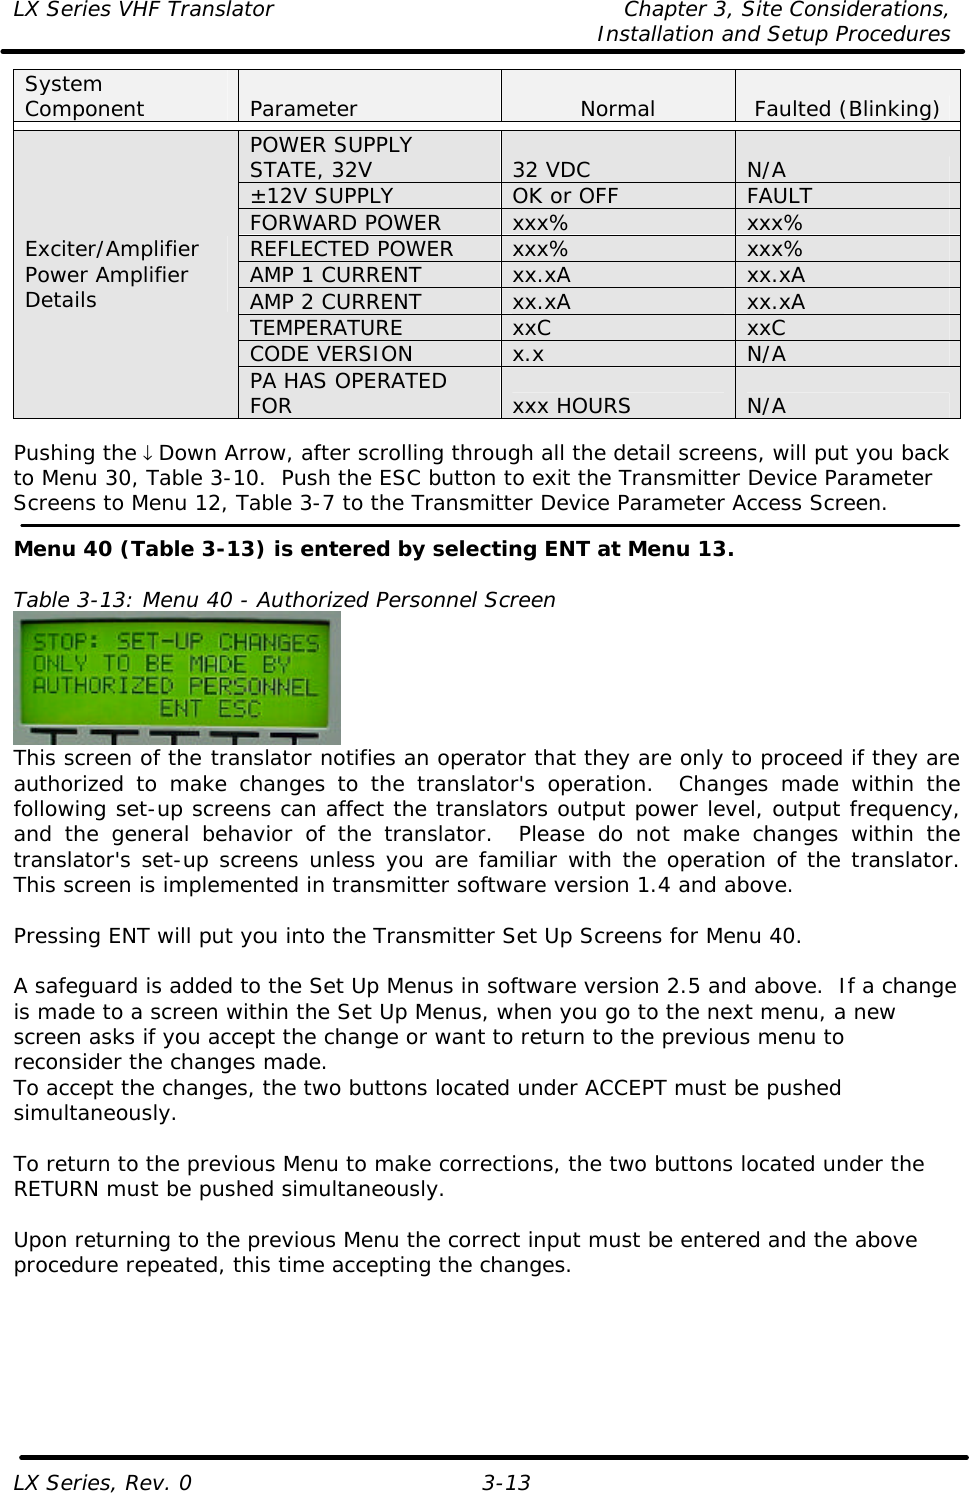 LX Series VHF Translator Chapter 3, Site Considerations,   Installation and Setup Procedures LX Series, Rev. 0 3-13 System Component Parameter Normal Faulted (Blinking)  POWER SUPPLY STATE, 32V 32 VDC N/A ±12V SUPPLY OK or OFF FAULT FORWARD POWER xxx% xxx% REFLECTED POWER xxx% xxx% AMP 1 CURRENT xx.xA xx.xA AMP 2 CURRENT xx.xA xx.xA TEMPERATURE xxC xxC CODE VERSION x.x N/A Exciter/Amplifier Power Amplifier Details PA HAS OPERATED FOR xxx HOURS N/A  Pushing the ↓ Down Arrow, after scrolling through all the detail screens, will put you back to Menu 30, Table 3-10.  Push the ESC button to exit the Transmitter Device Parameter Screens to Menu 12, Table 3-7 to the Transmitter Device Parameter Access Screen.  Menu 40 (Table 3-13) is entered by selecting ENT at Menu 13.  Table 3-13: Menu 40 - Authorized Personnel Screen  This screen of the translator notifies an operator that they are only to proceed if they are authorized to make changes to the translator&apos;s operation.  Changes made within the following set-up screens can affect the translators output power level, output frequency, and the general behavior of the translator.  Please do not make changes within the translator&apos;s set-up screens unless you are familiar with the operation of the translator. This screen is implemented in transmitter software version 1.4 and above.  Pressing ENT will put you into the Transmitter Set Up Screens for Menu 40.  A safeguard is added to the Set Up Menus in software version 2.5 and above.  If a change is made to a screen within the Set Up Menus, when you go to the next menu, a new screen asks if you accept the change or want to return to the previous menu to reconsider the changes made. To accept the changes, the two buttons located under ACCEPT must be pushed simultaneously.  To return to the previous Menu to make corrections, the two buttons located under the RETURN must be pushed simultaneously.  Upon returning to the previous Menu the correct input must be entered and the above procedure repeated, this time accepting the changes. 